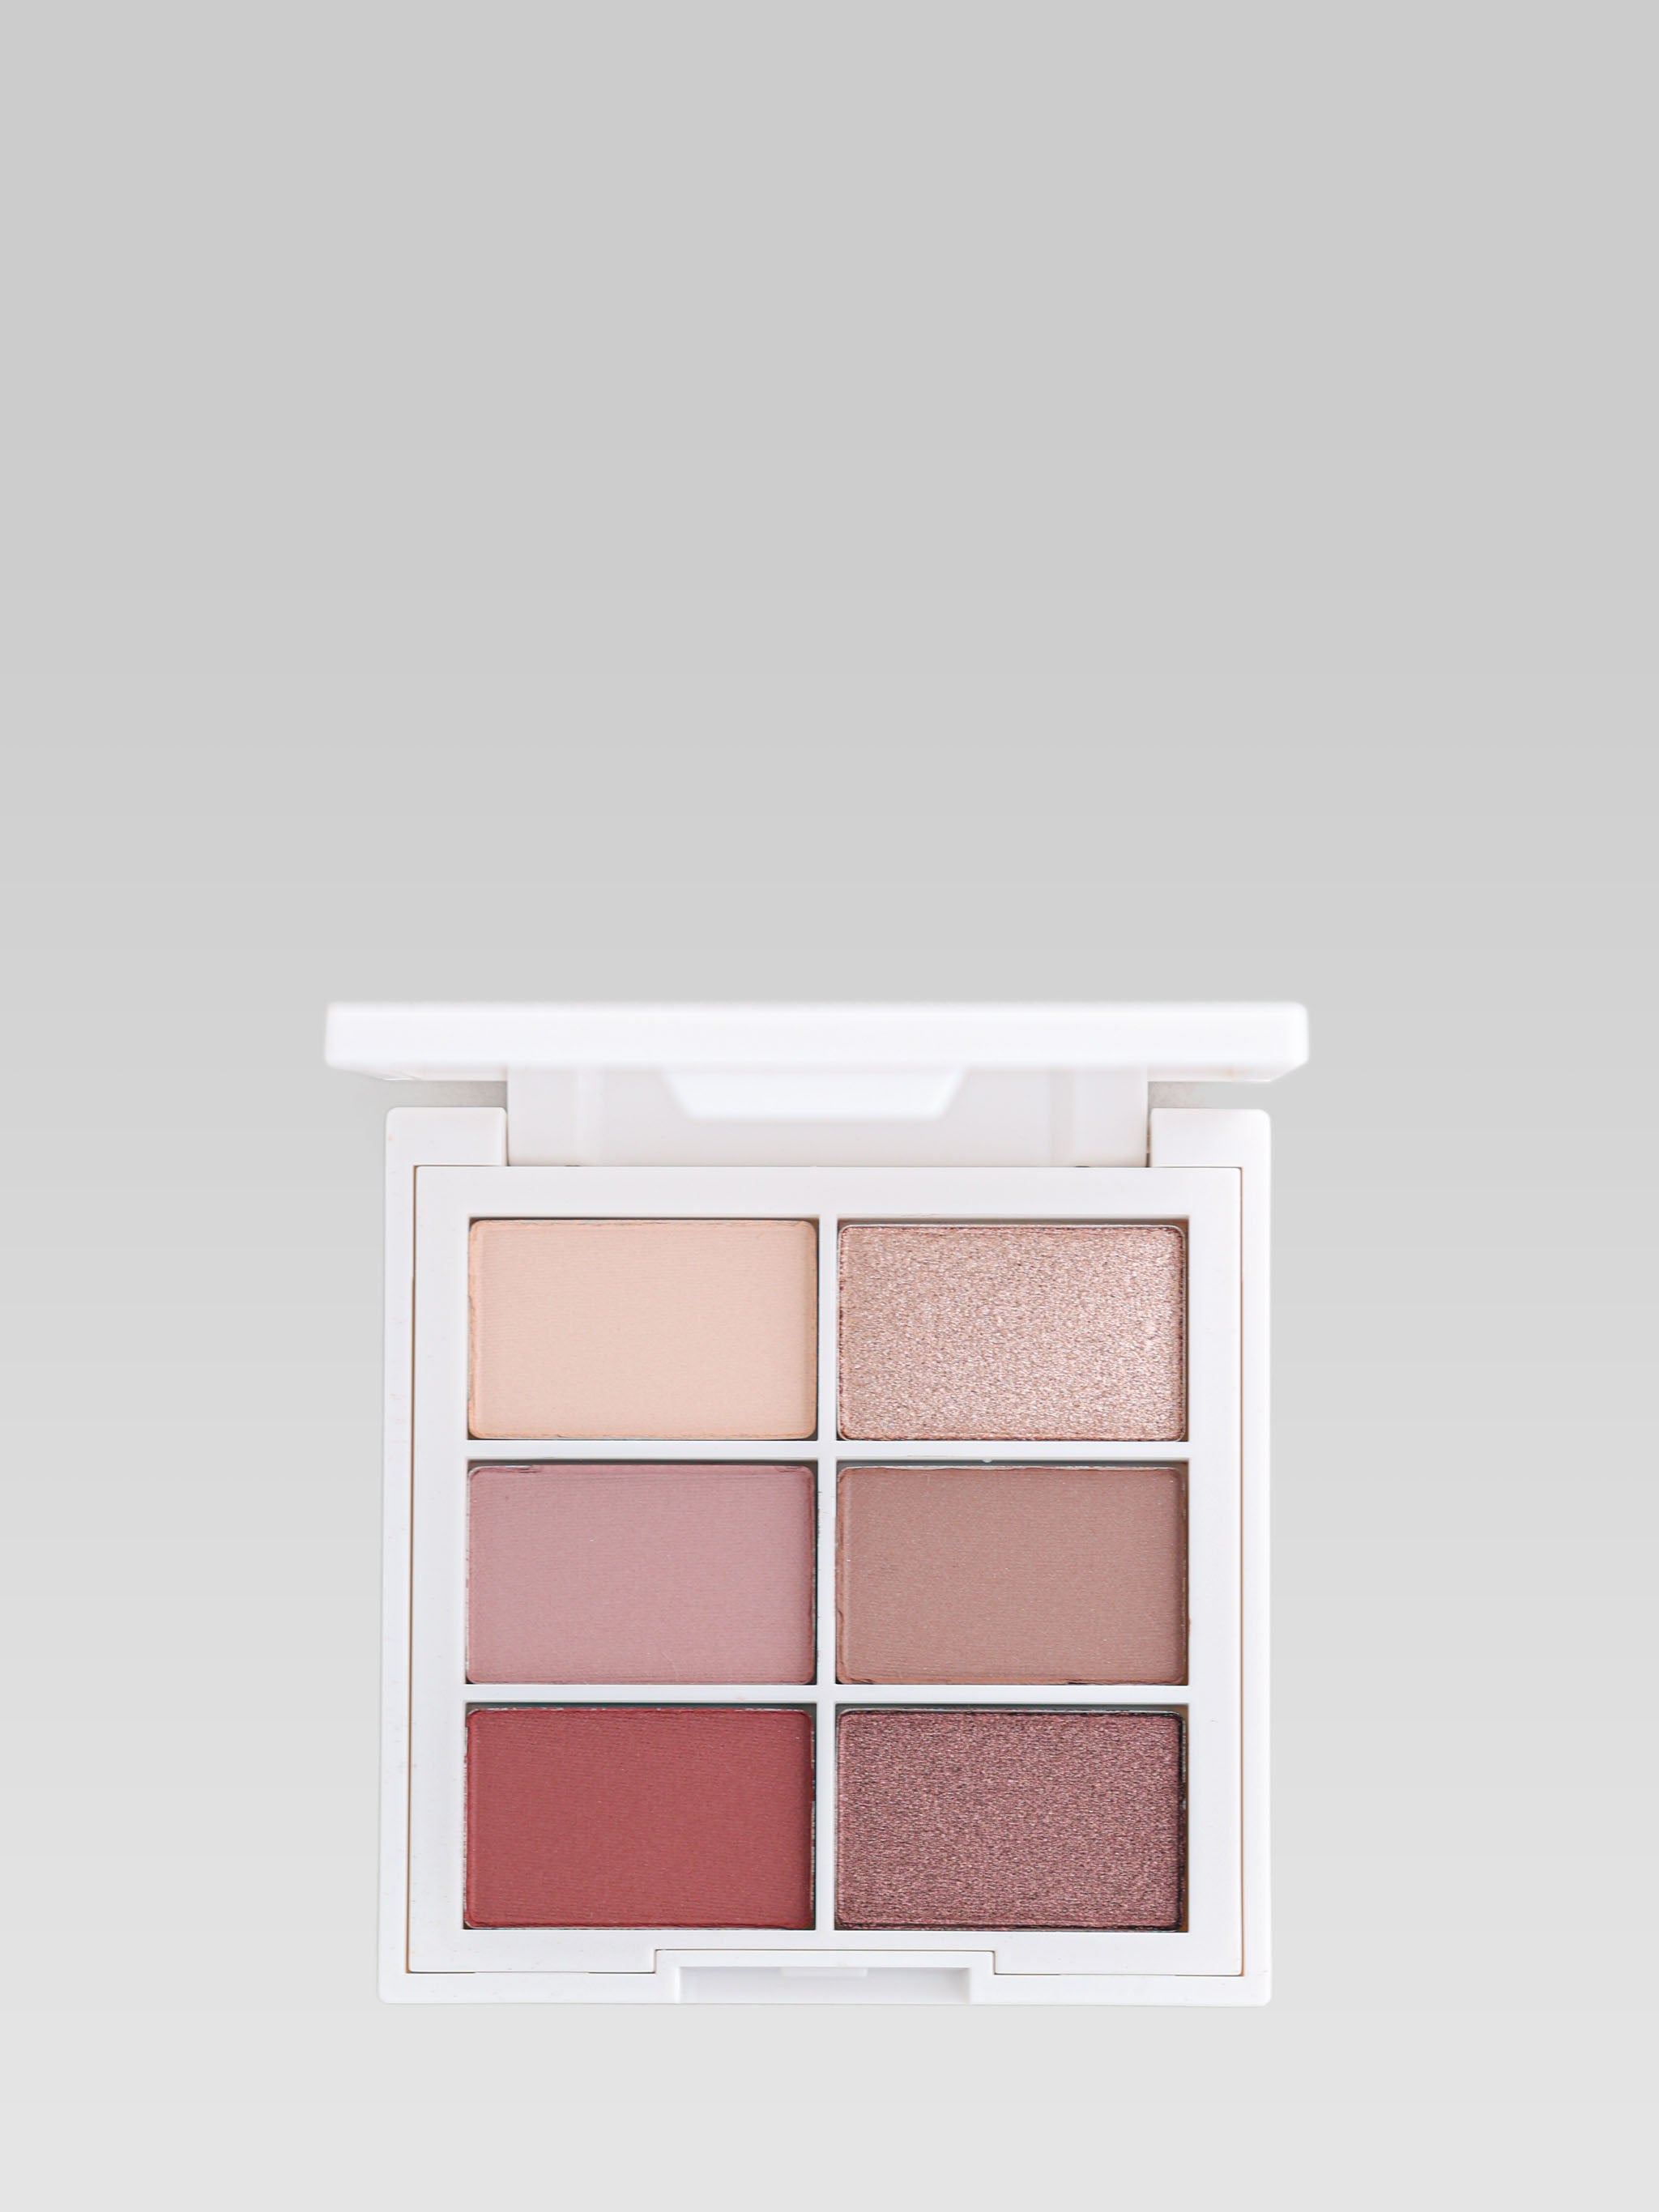 ILIA BEAUTY The Necessary Eyeshadow Palette in Cool Nude product shot 